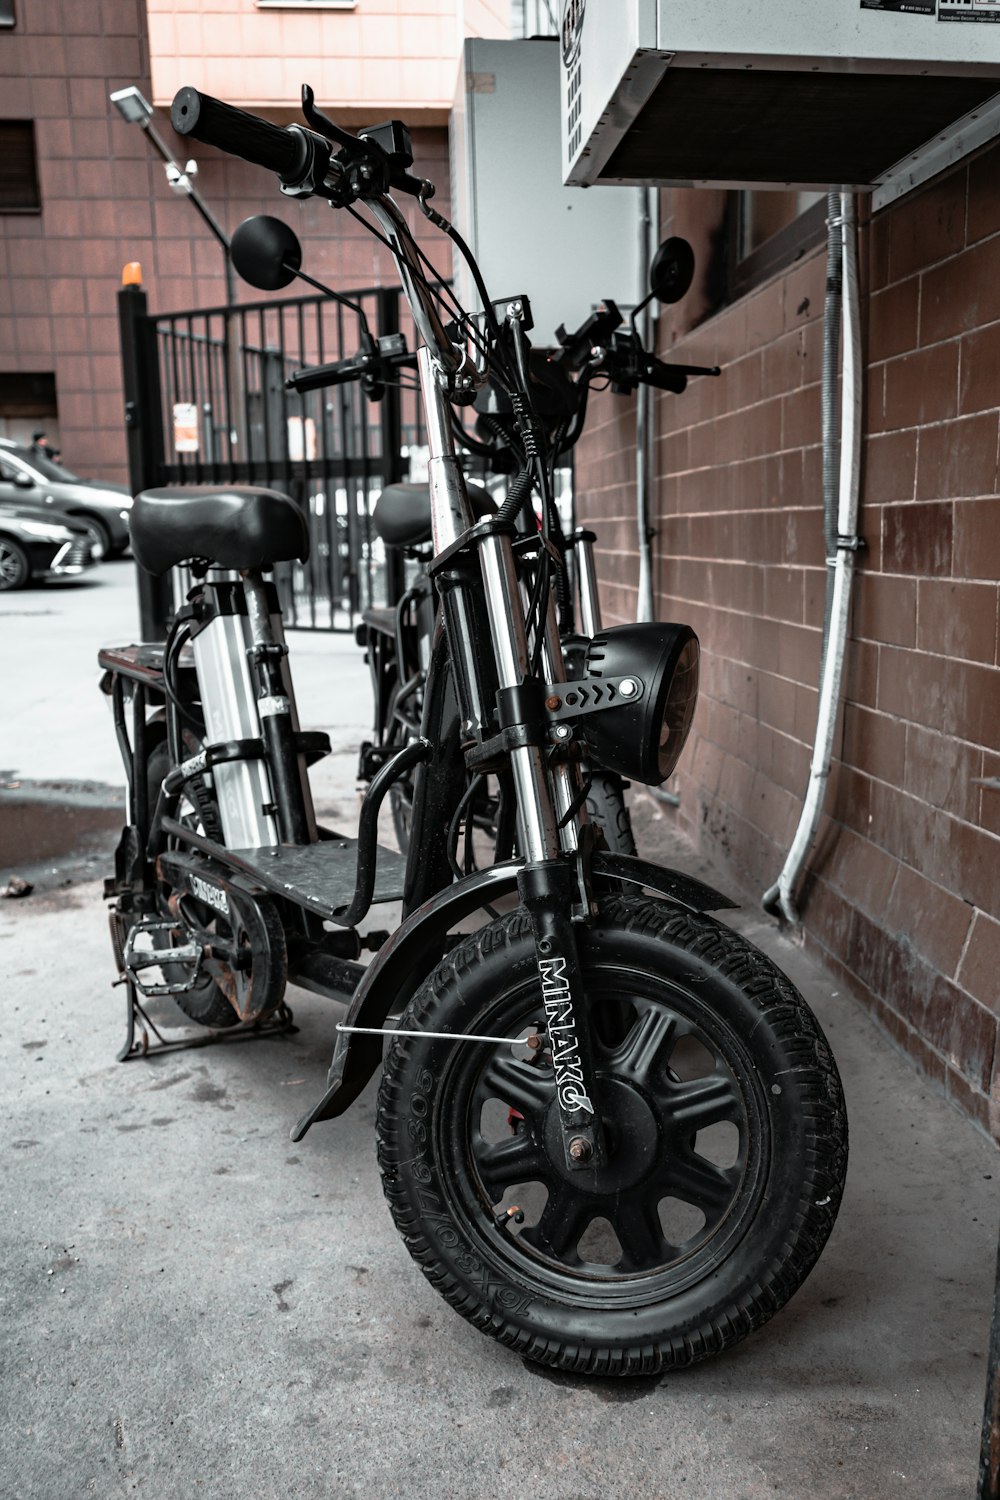 a black scooter parked next to a brick wall